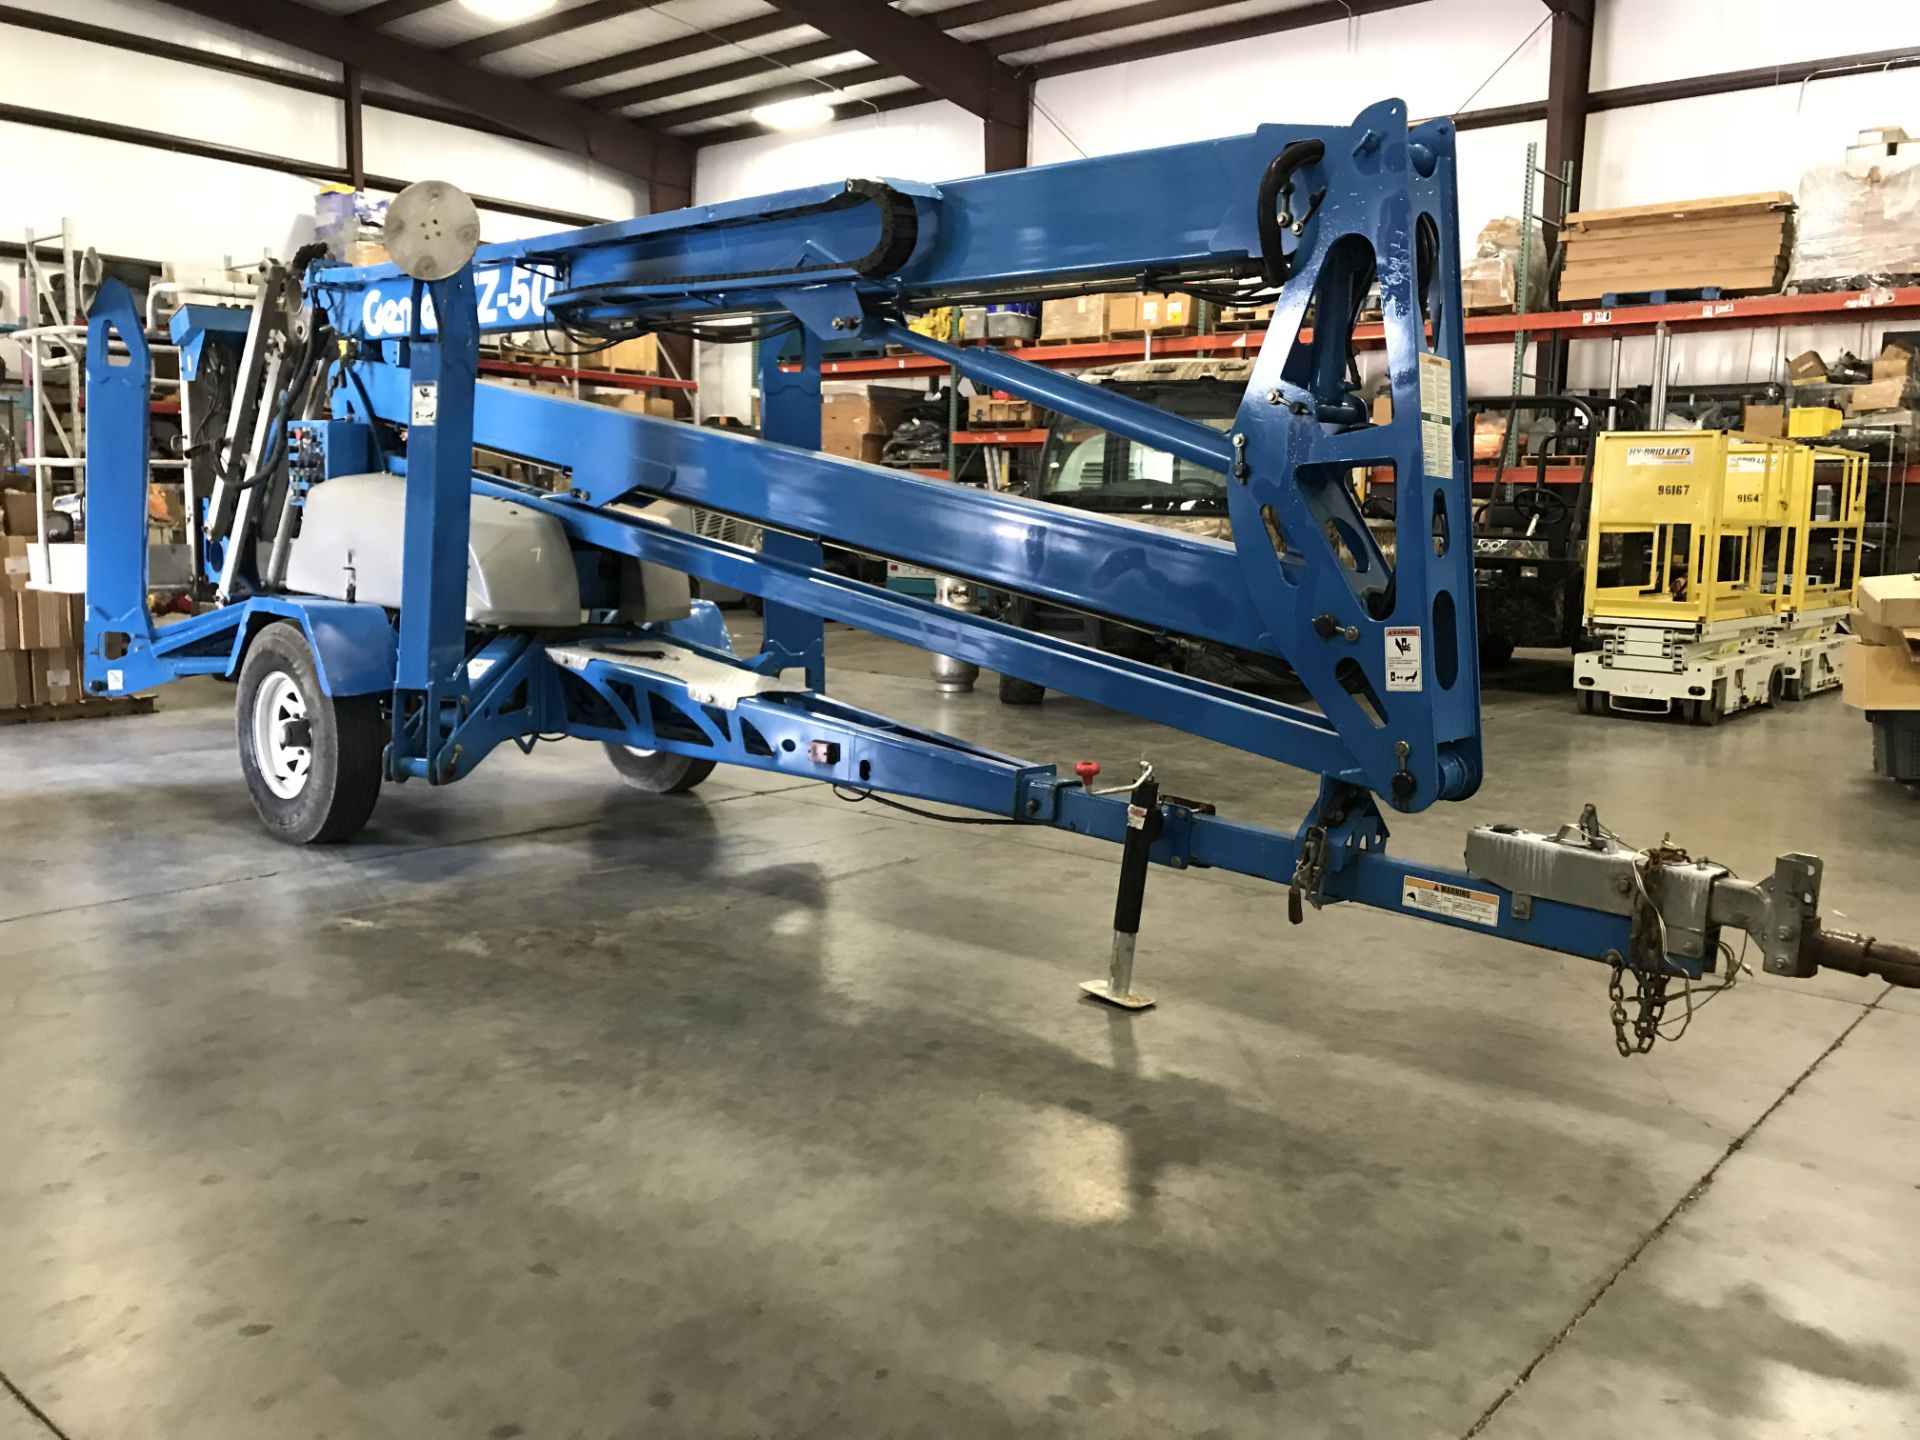 2006 GENIE TZ50 TRAILER MOUNTED BOOM LIFT, ELECTRIC POWERED, 50' PLATFORM HEIGHT, 500LB LIFT CAP., - Image 2 of 9